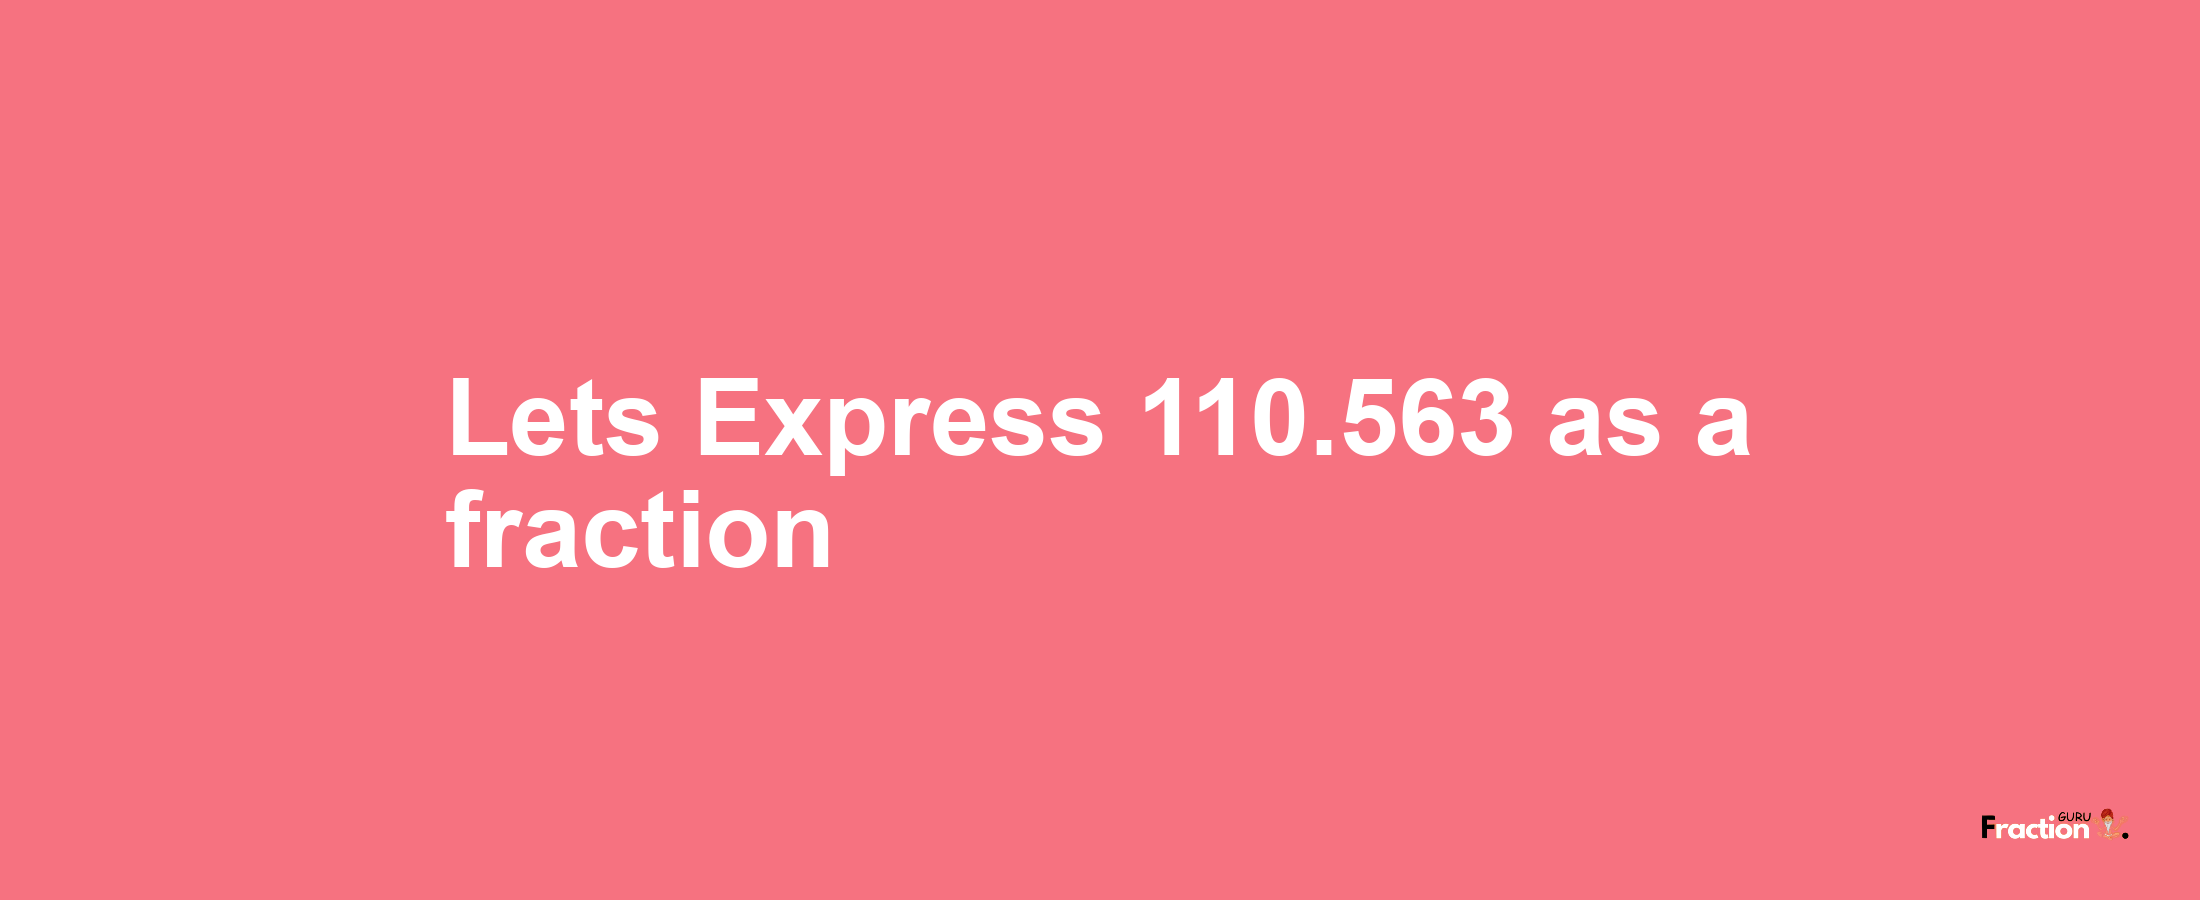 Lets Express 110.563 as afraction